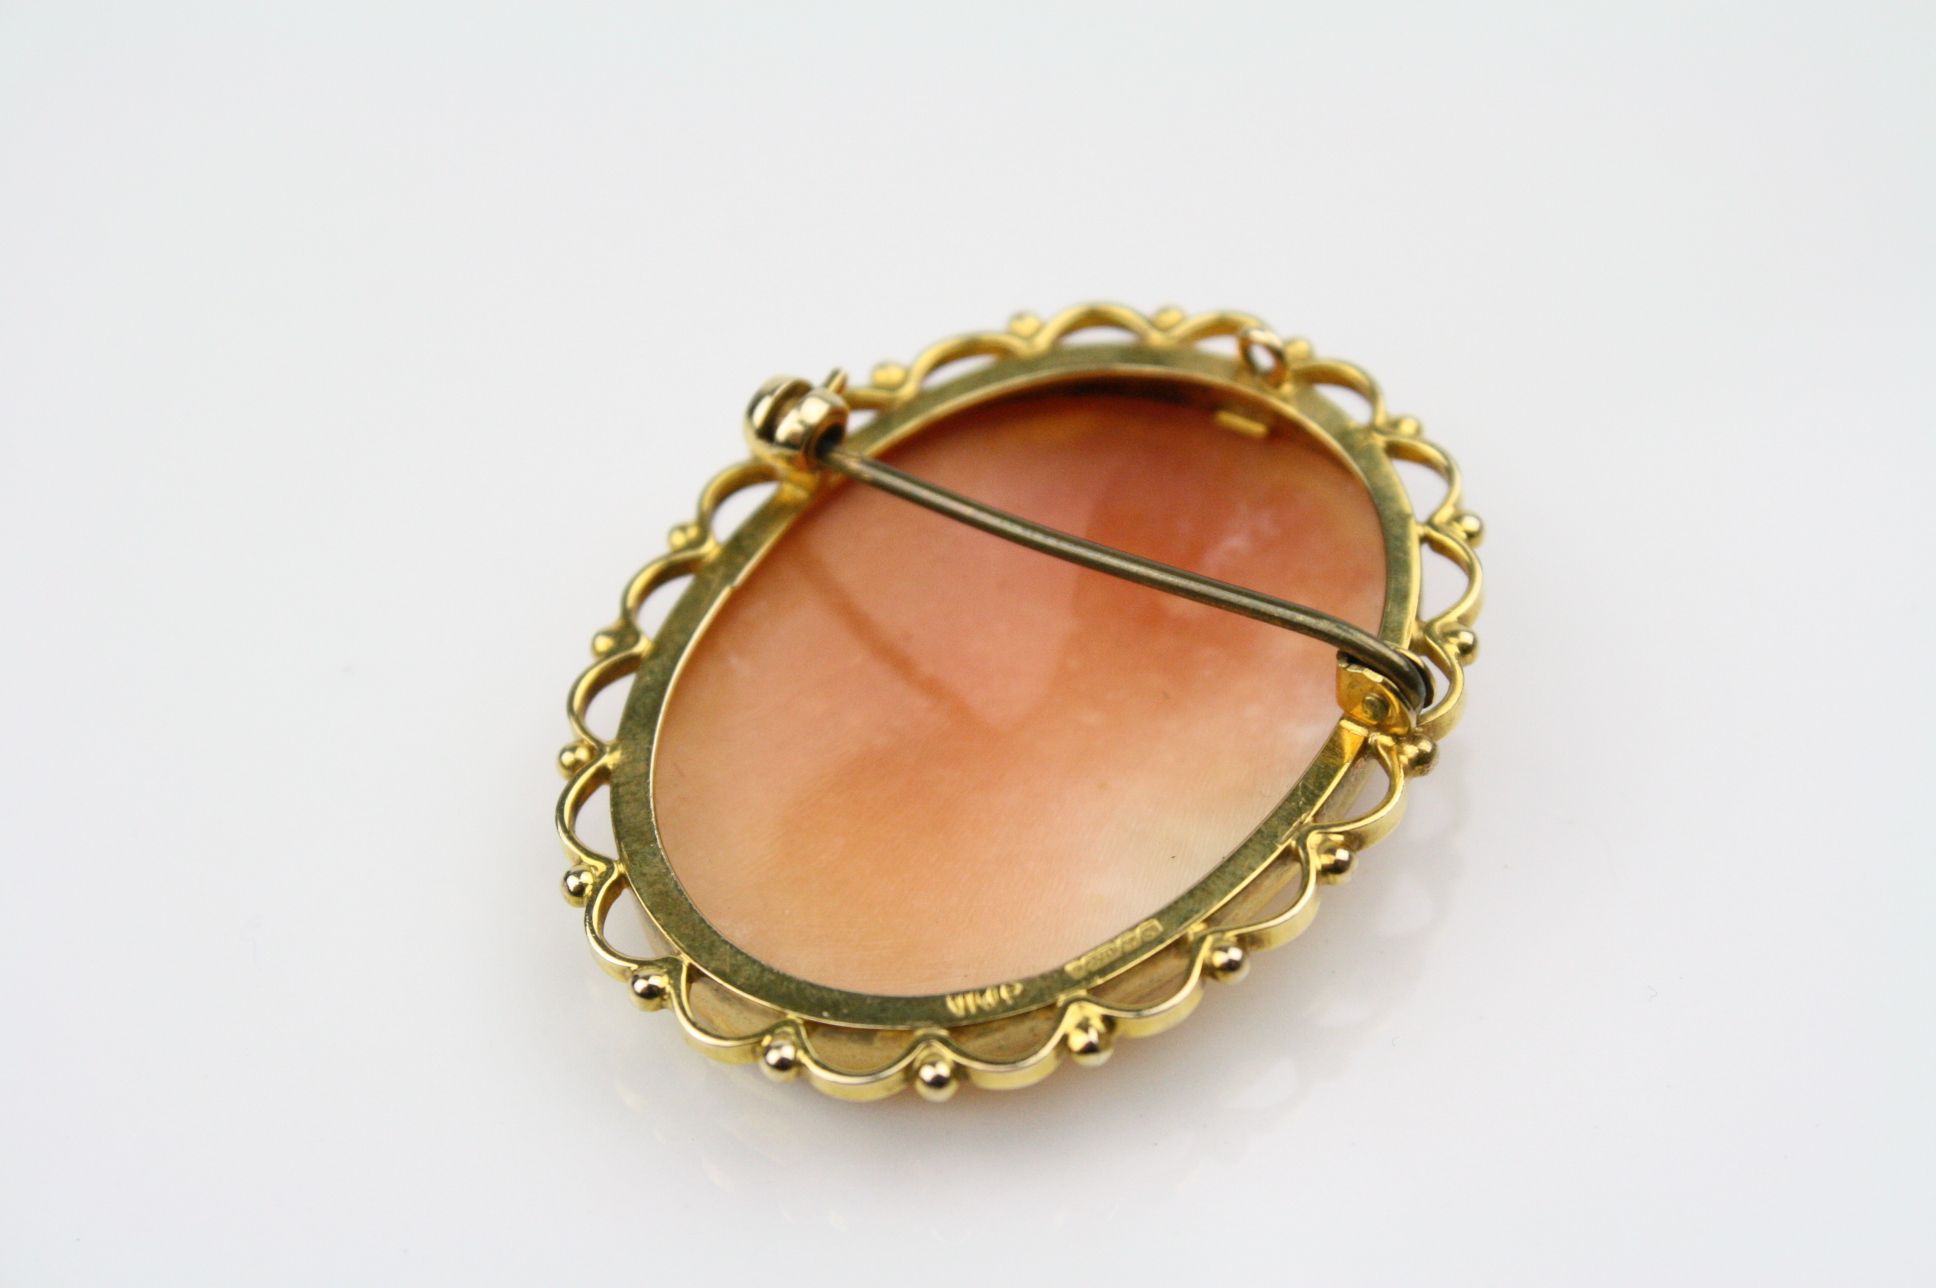 Shell cameo 9ct yellow gold brooch, the cameo depicting female profile, collet setting, scroll and - Image 3 of 4